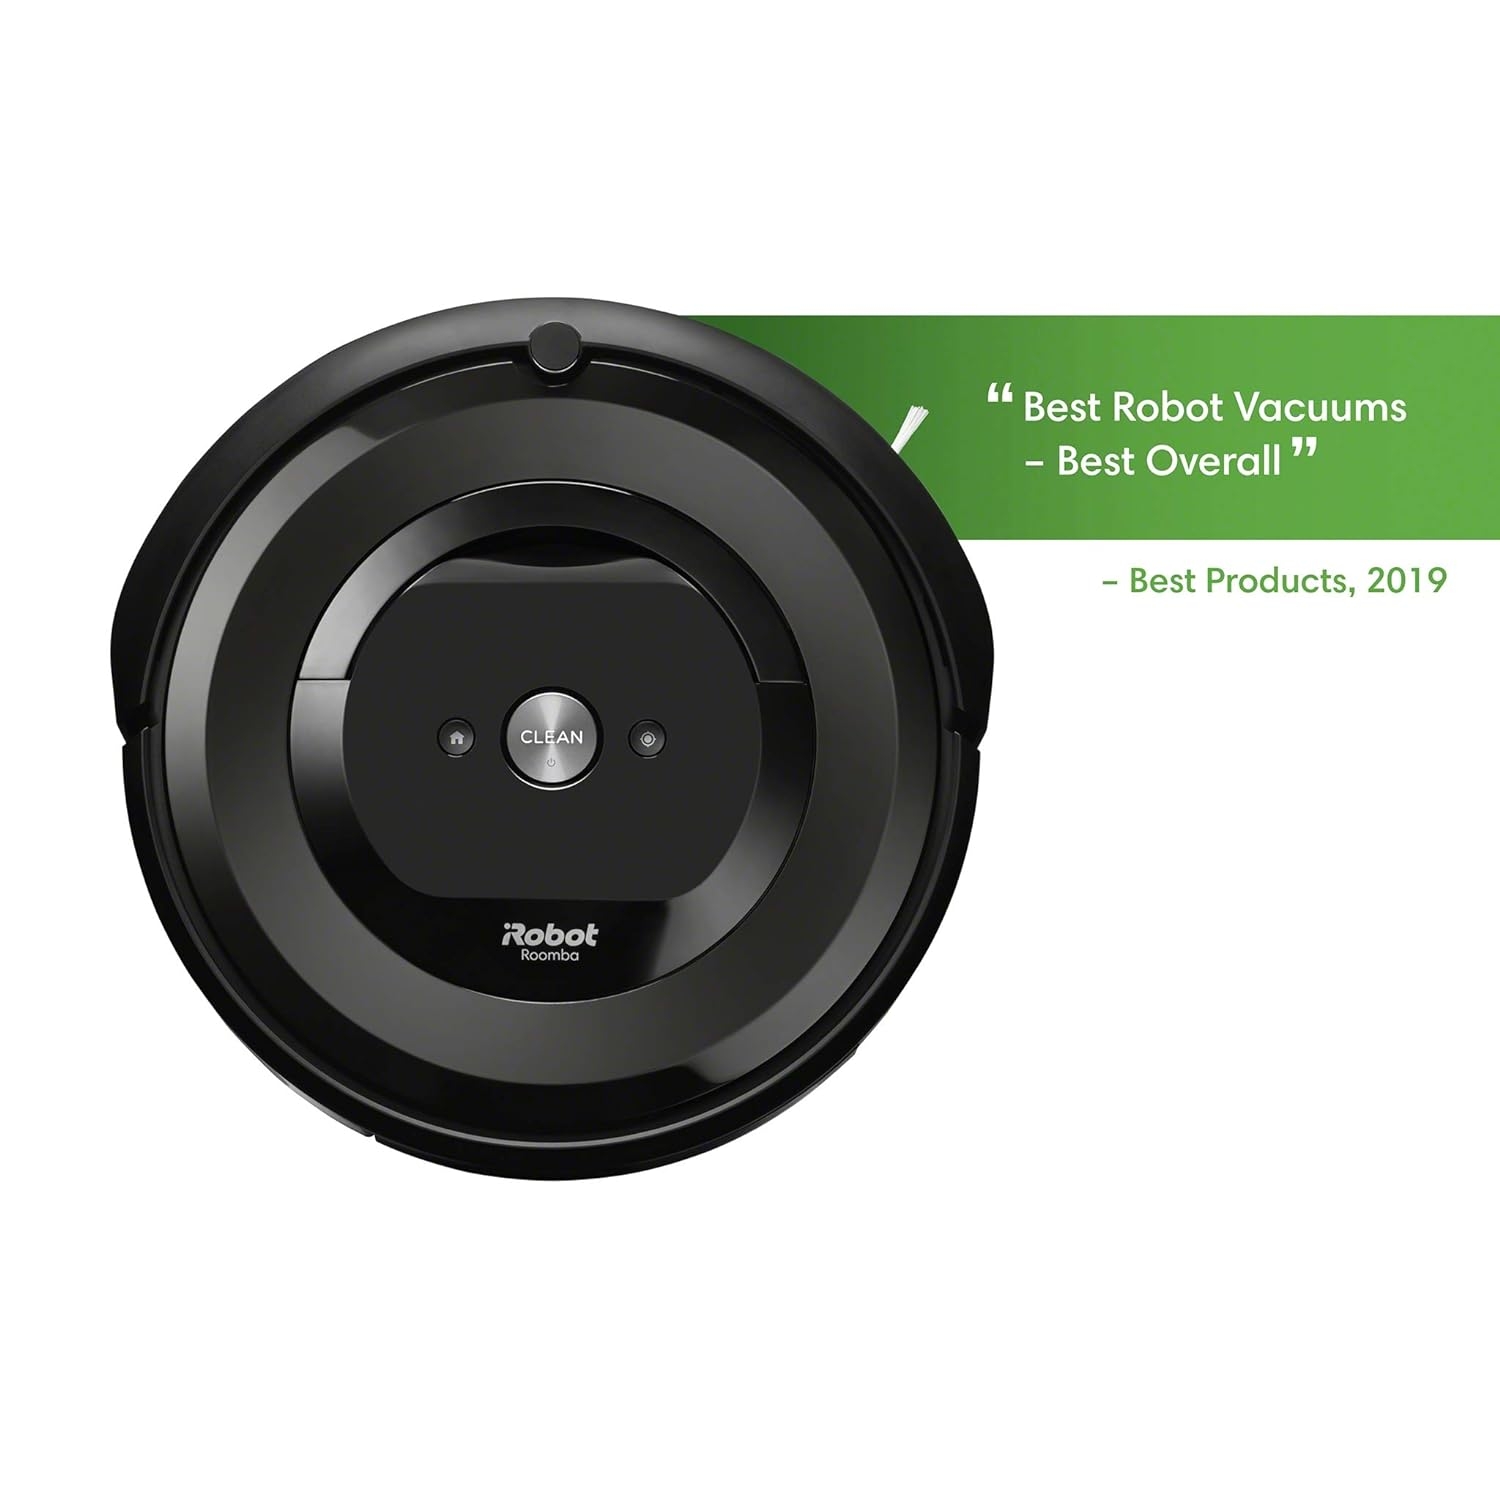 iRobot Roomba E5 (5150) Robot Vacuum - Wi-Fi Connected, Works with Alexa, Ideal for Pet Hair, Carpets, Hard, Self-Charging Robotic Vacuum